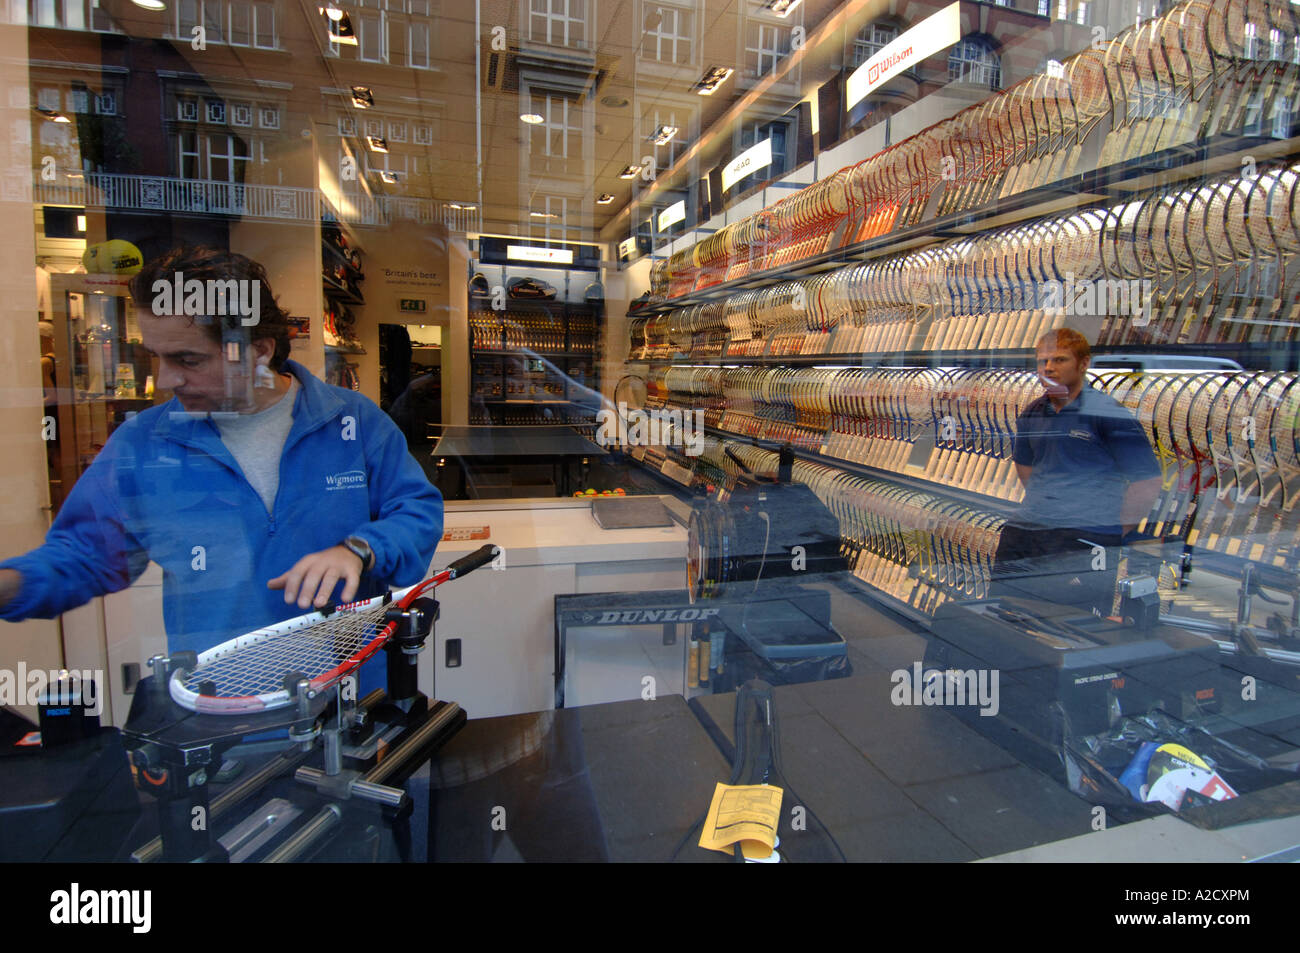 Looking through the window of a tennis racket shop in central London Stock  Photo - Alamy